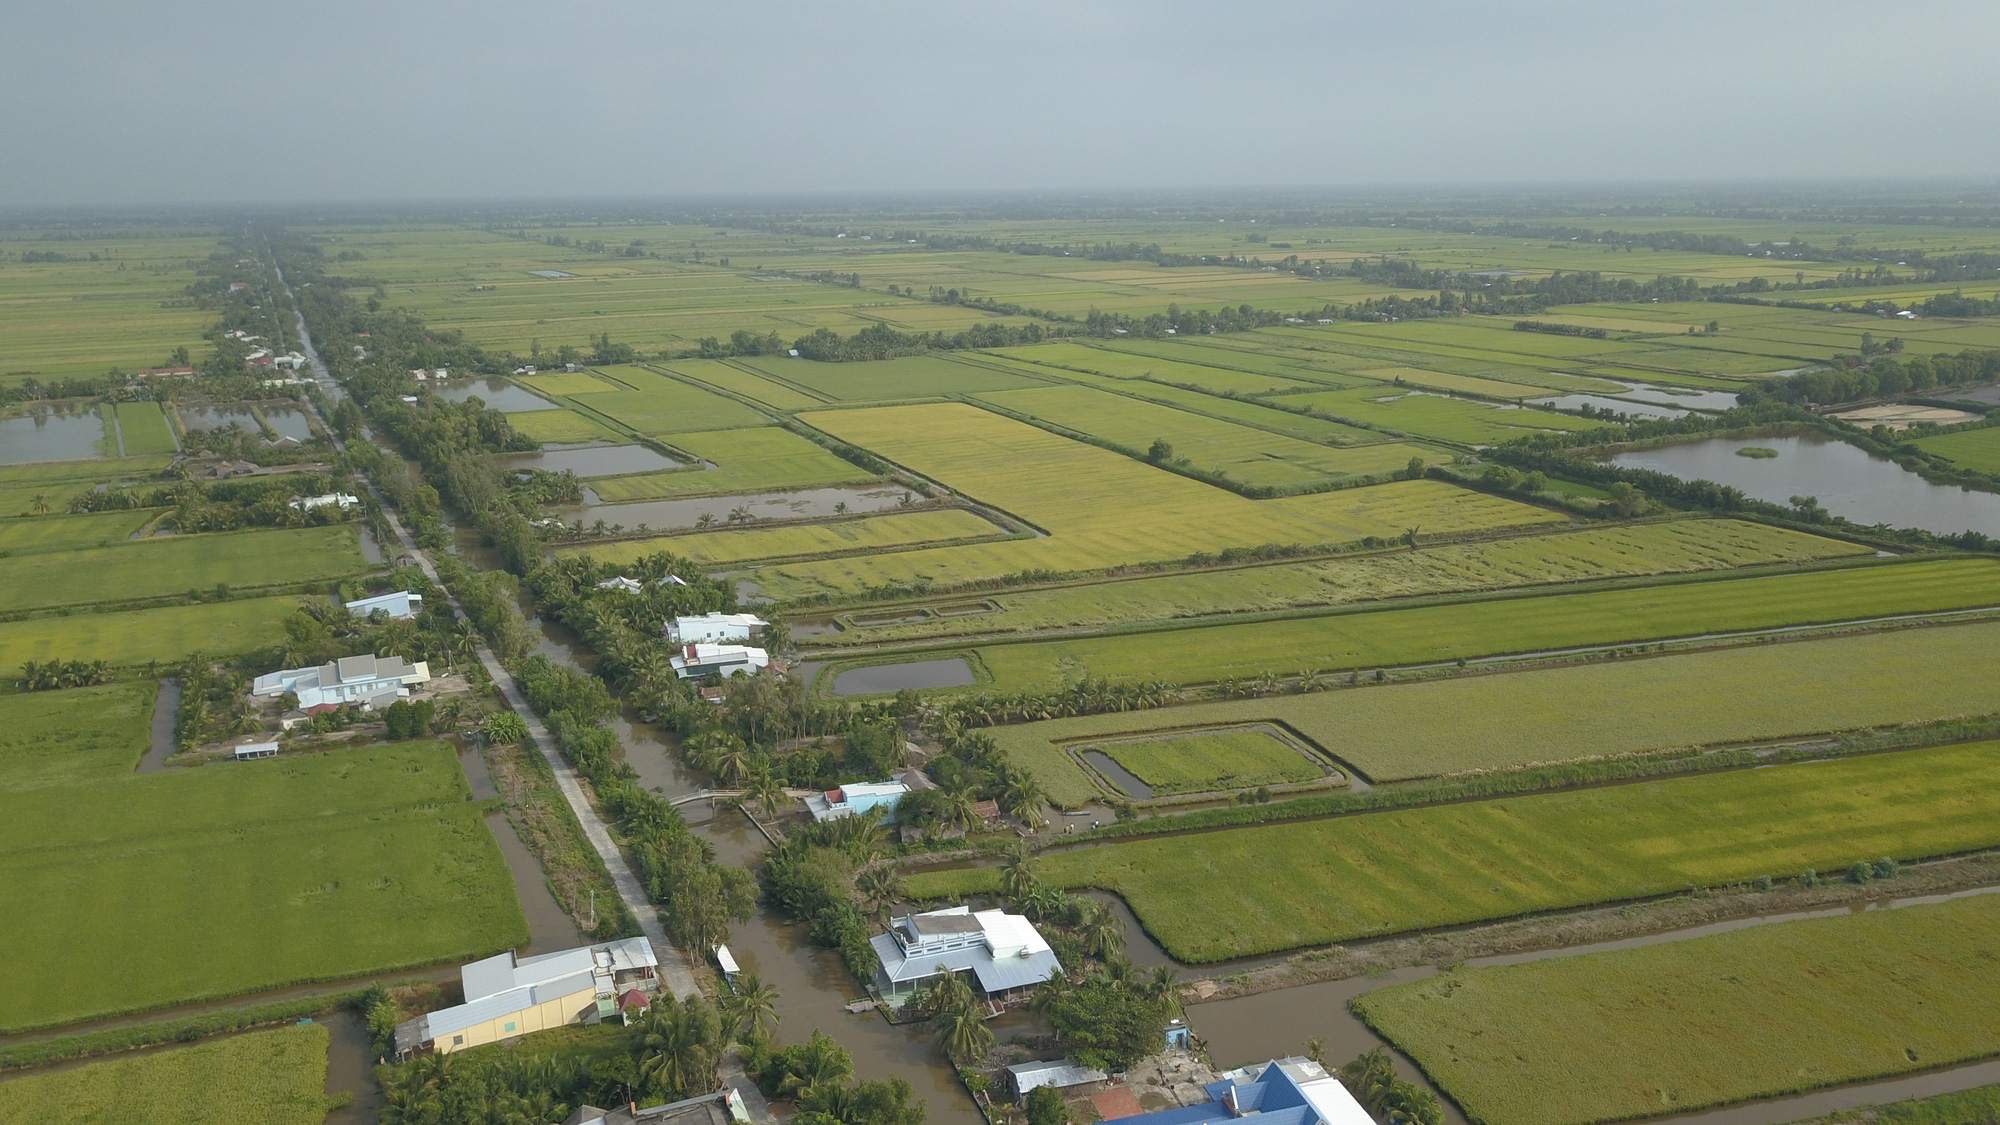 Vietnam to invest $375mn in high-quality, low-emission rice production in Mekong Delta